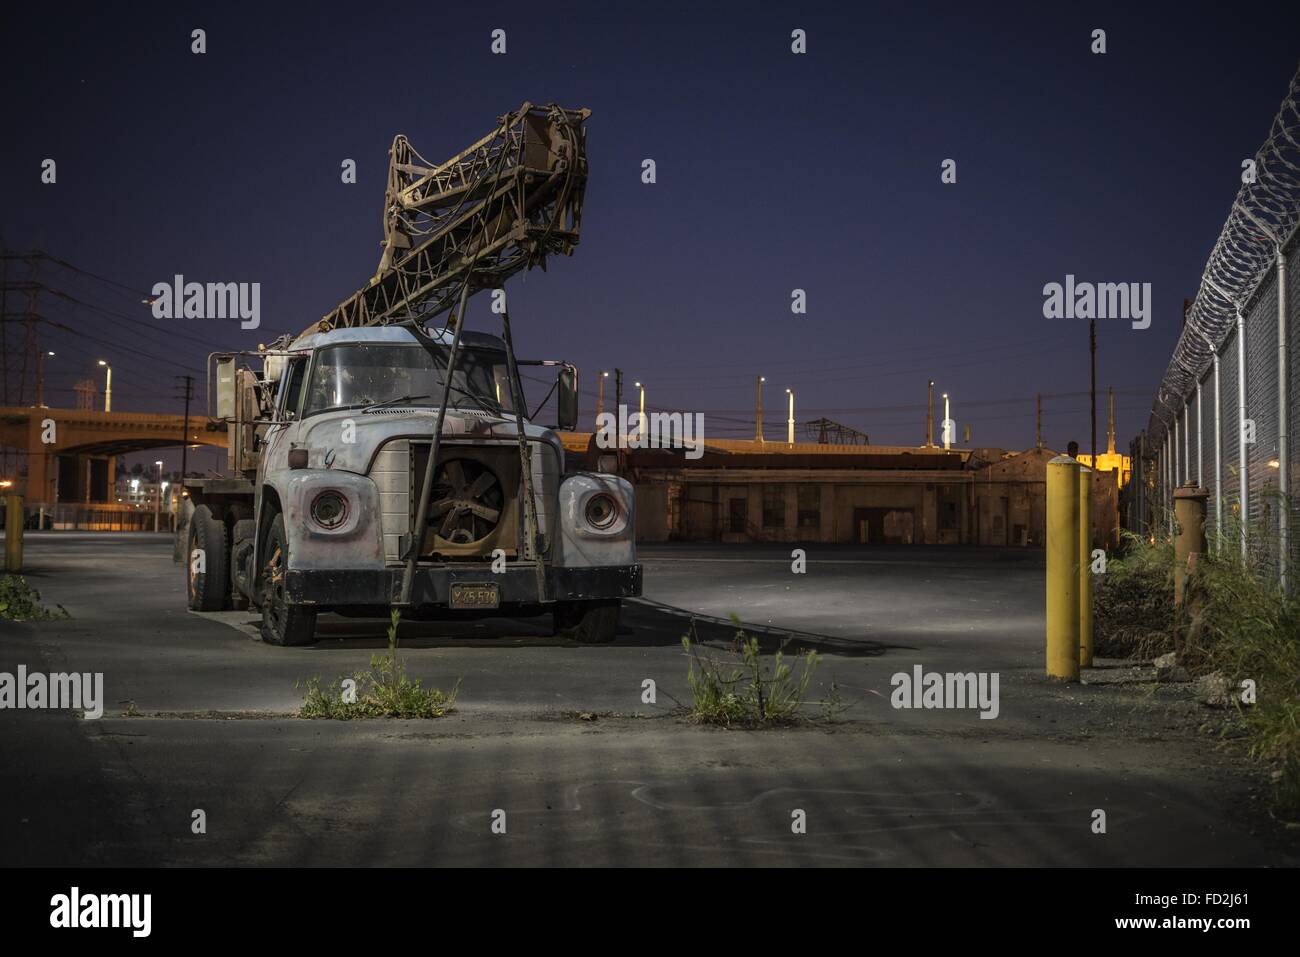 Los Angeles, California, USA. 14th Feb, 2015. An ancient drill-rig sits in the sign-glow of Lucky Brand headquarters, in the Arts District, downtown LA. The 6th Street Bride stands in the background. © Fred Hoerr/ZUMA Wire/Alamy Live News Stock Photo